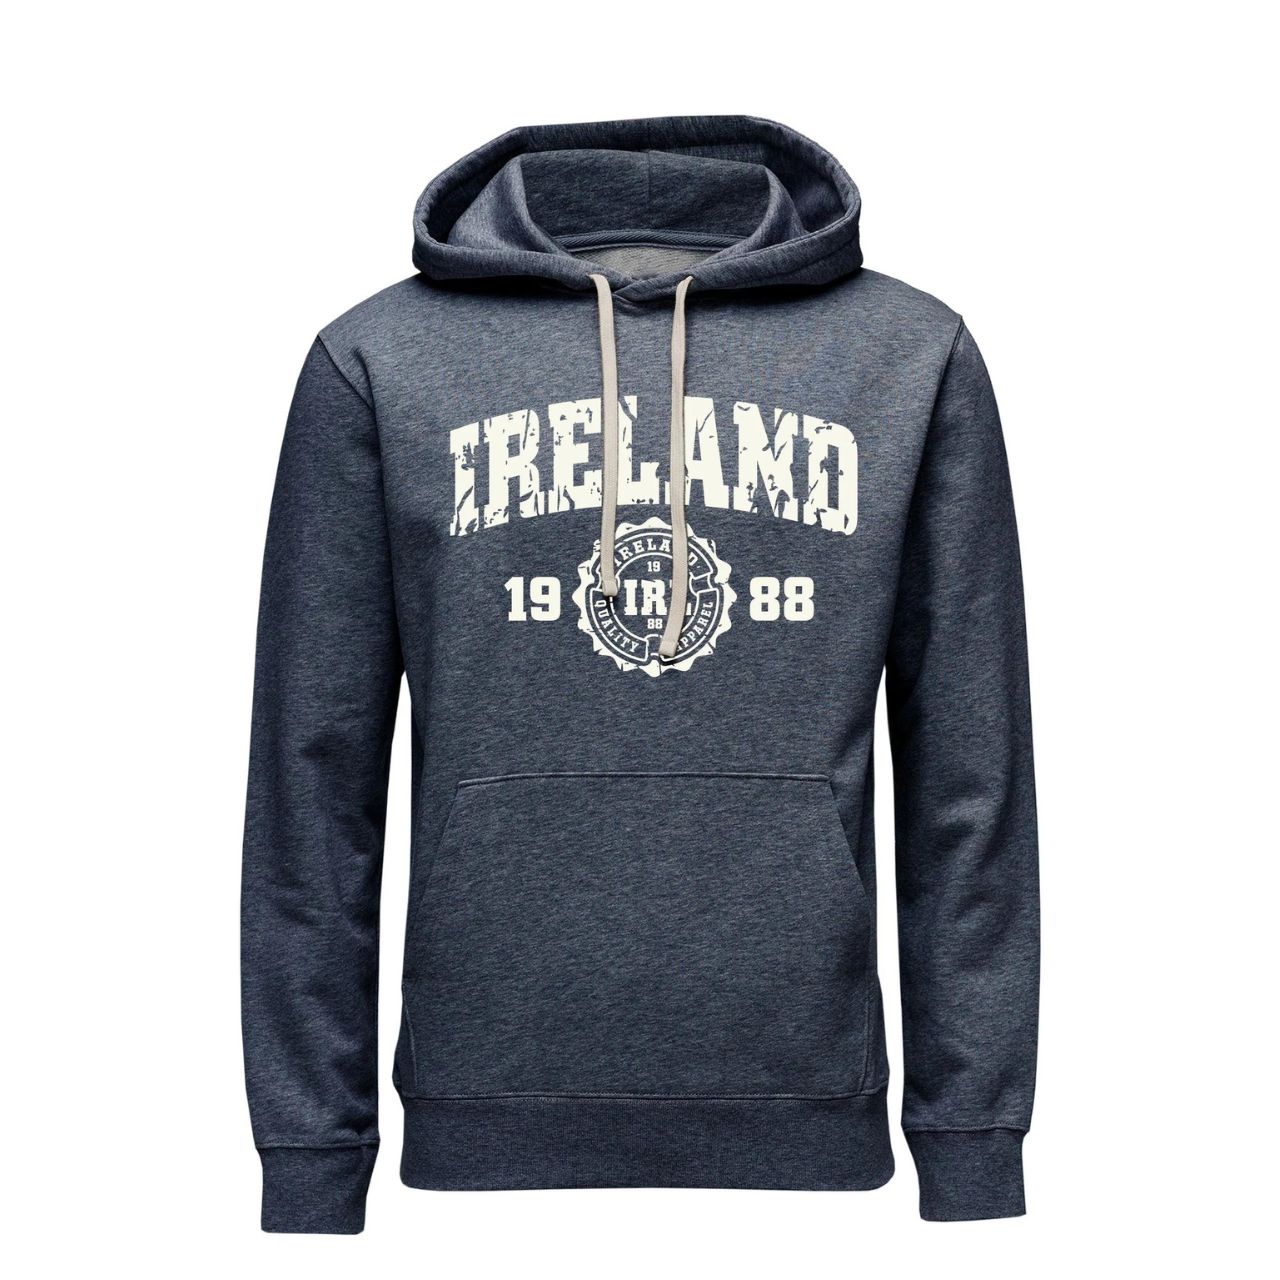 Cara Craft Ireland Navy Hoodie  - 70% cotton, 30% polyester - Crew Neck - Designed And Printed in Ireland By Cara craft - Machine Washable